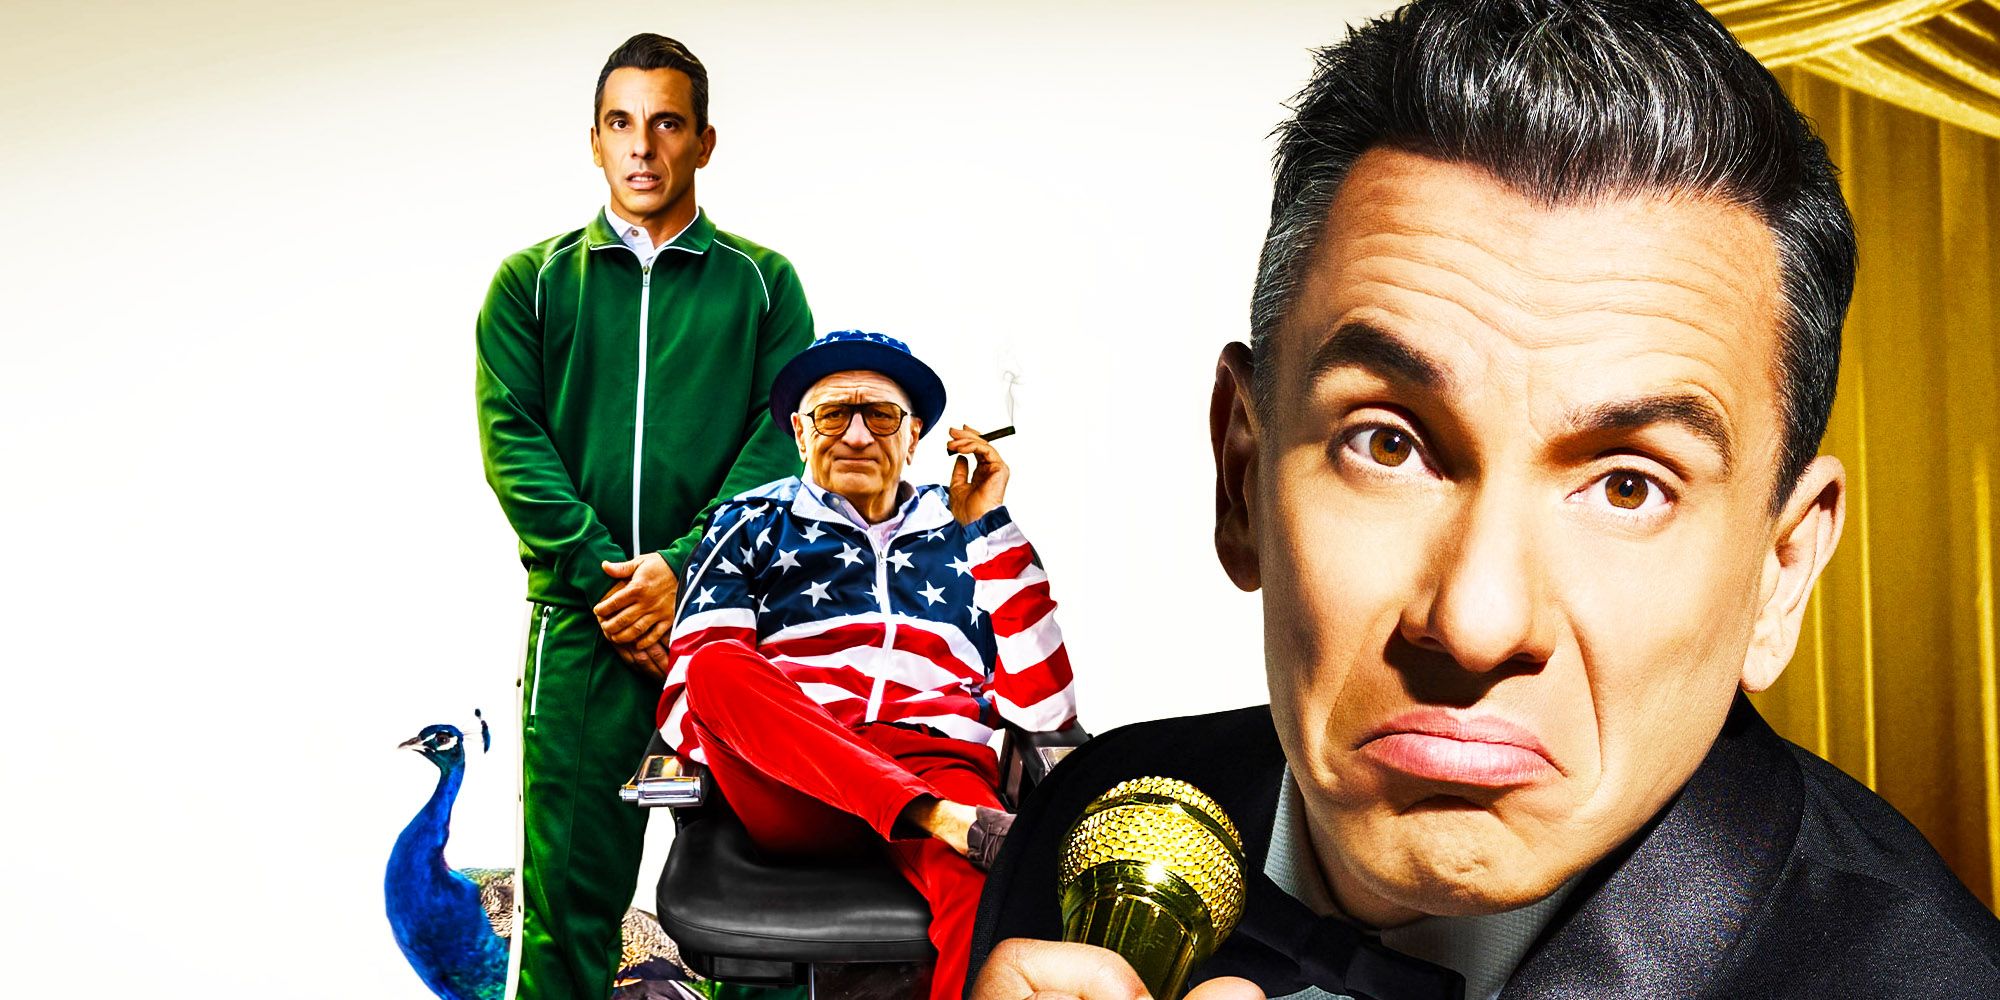 Sebastian Maniscalco about my father